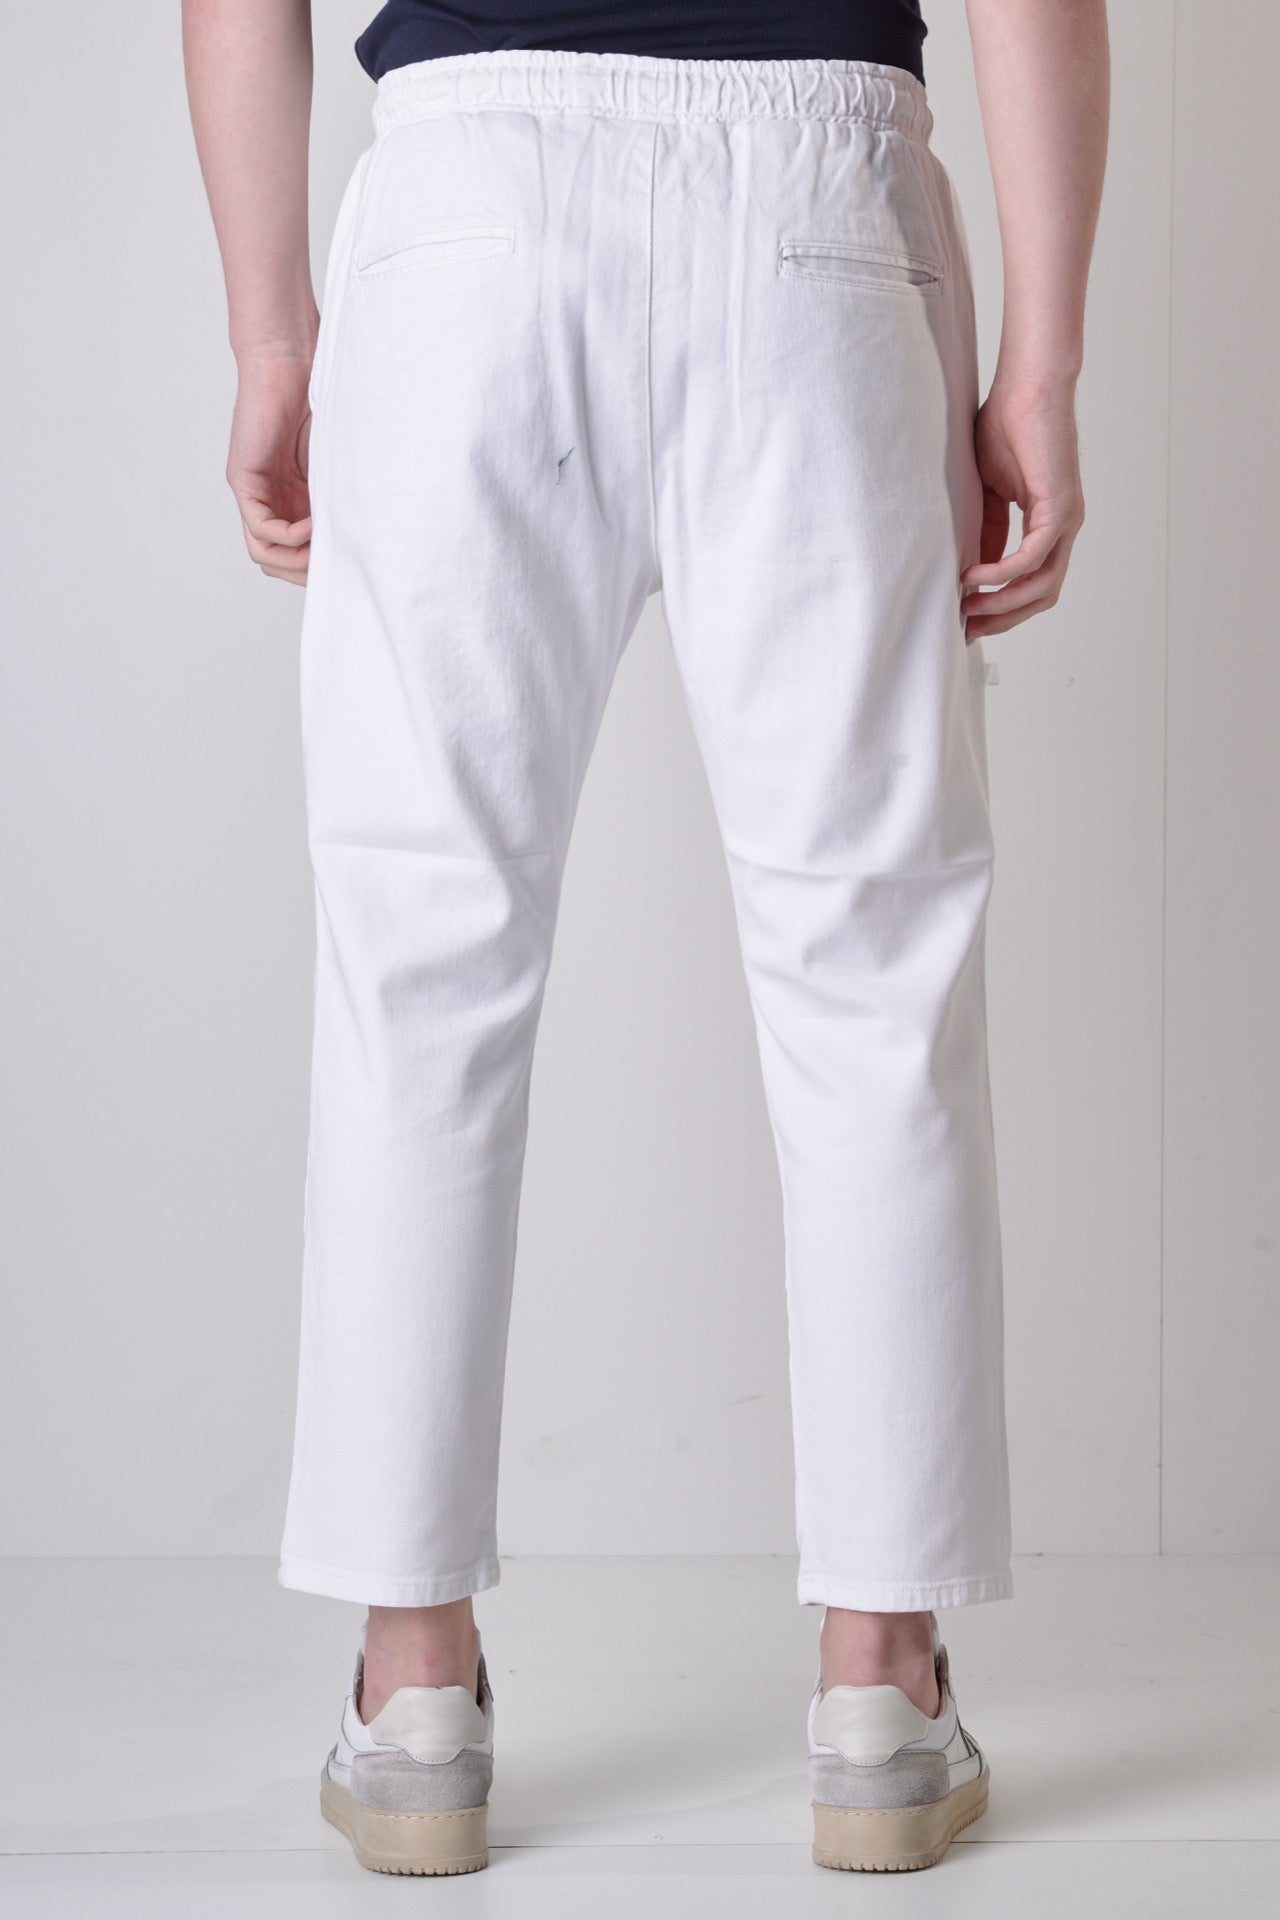 ALICANTE - White Drill trousers with elastic